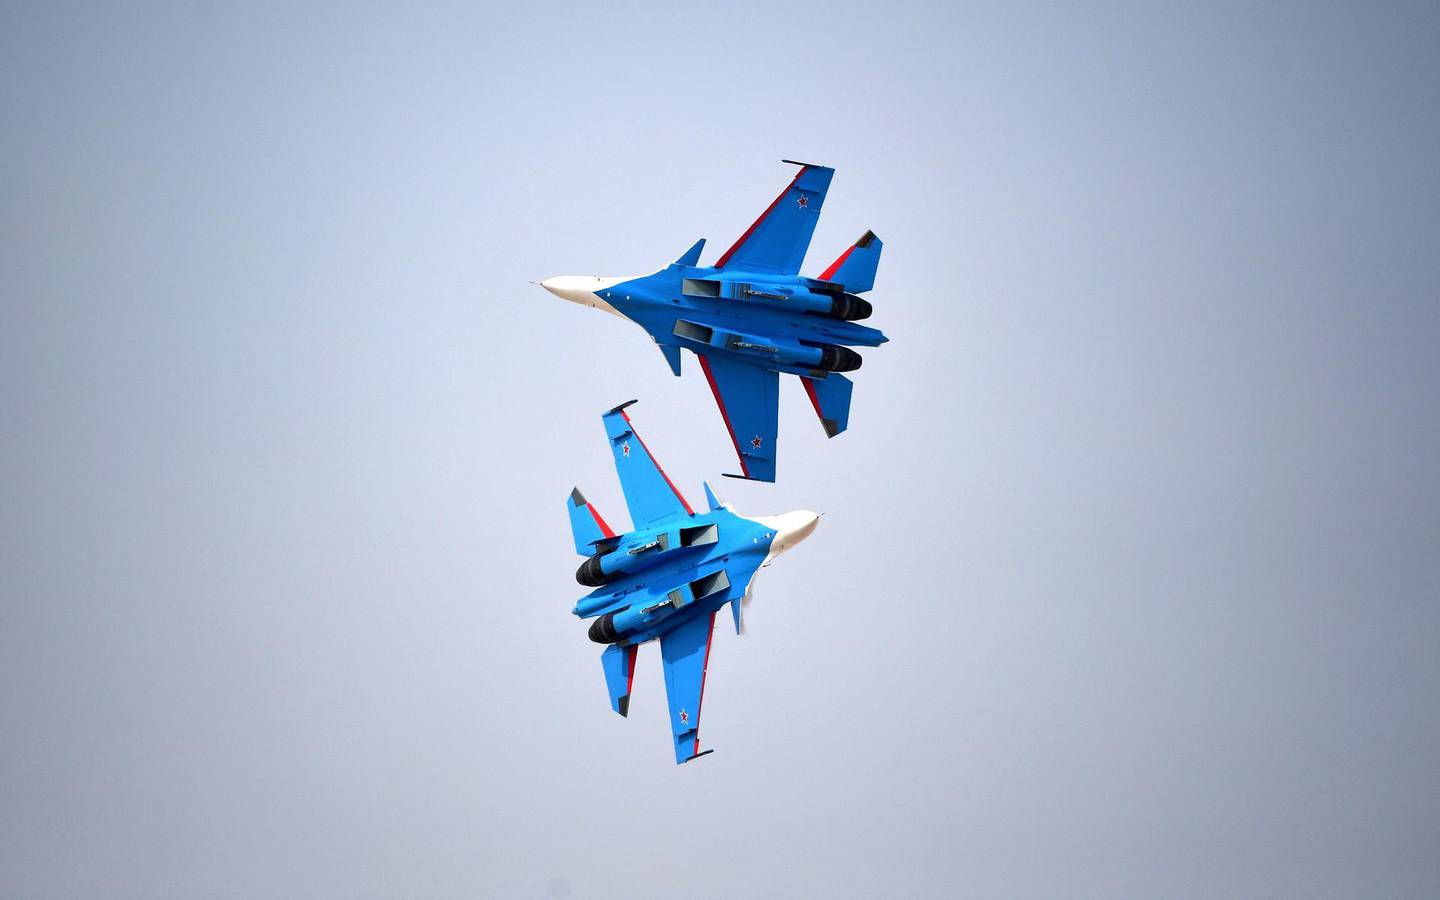 epa06324825 The Russian Knights aerobatic team performs close range manoeuvres with Sukhoi Su-30 fighters during the opening day of Dubai Airshow, UAE, 12 November 2017.  EPA/MARTIN DOKOUPIL